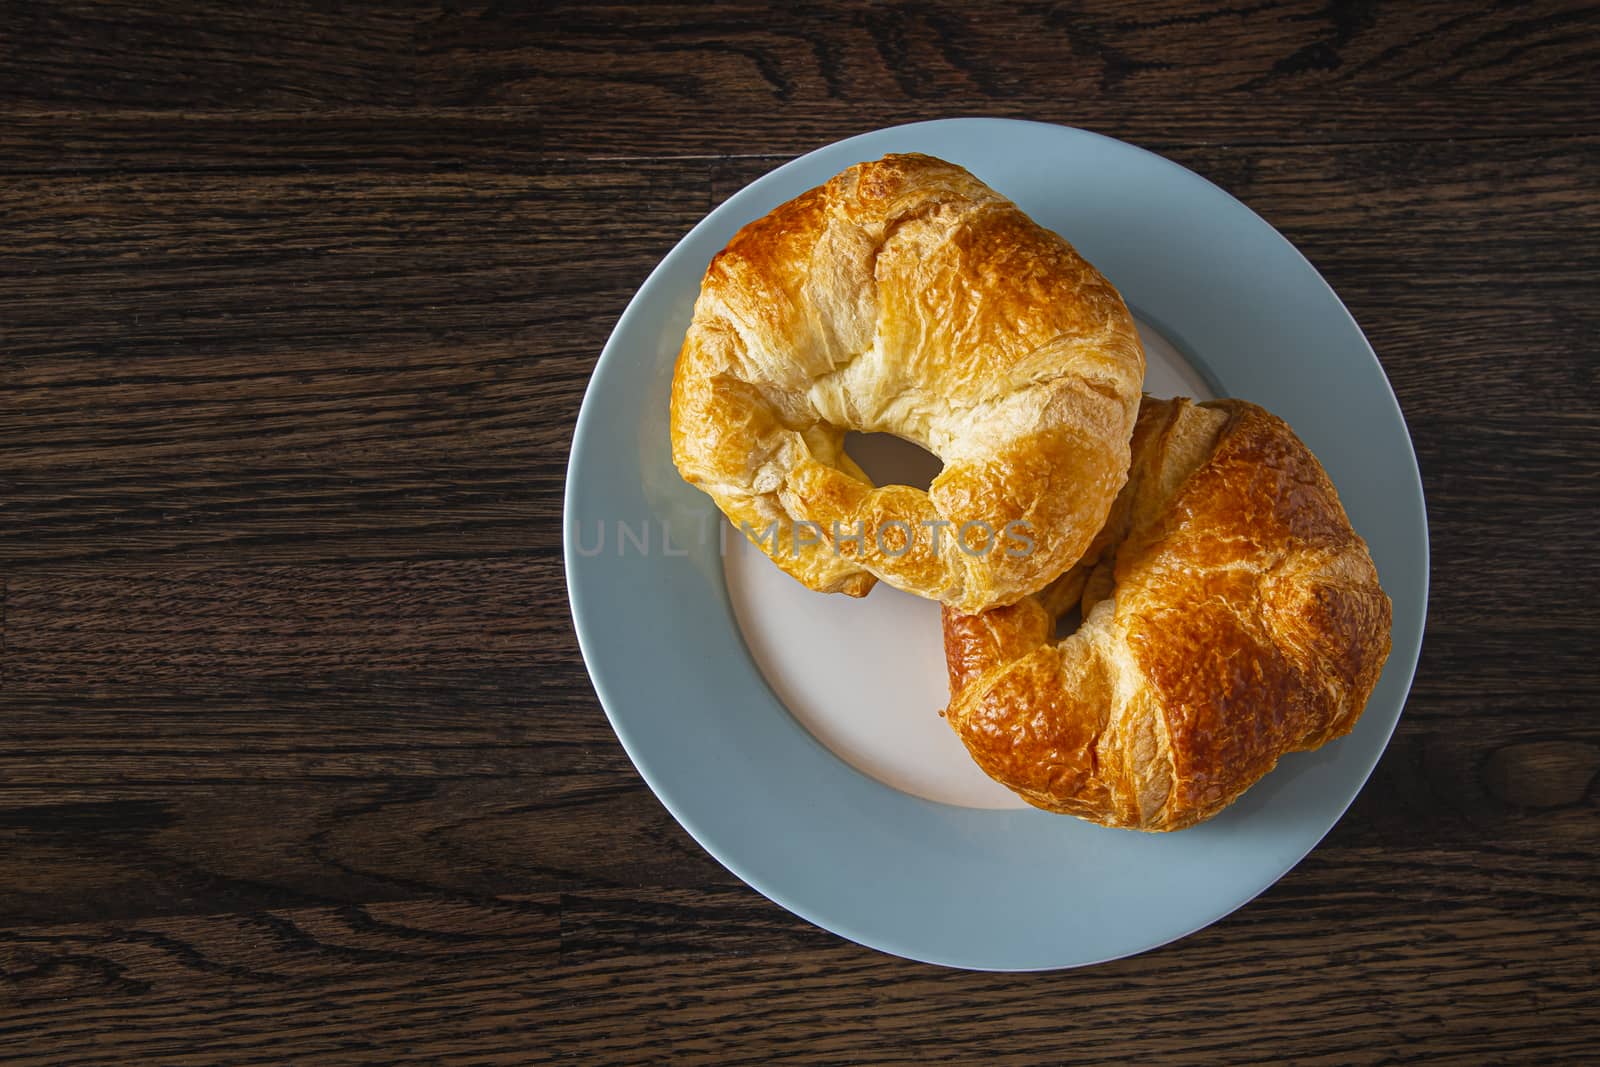 Croissant on a plate by mypstudio